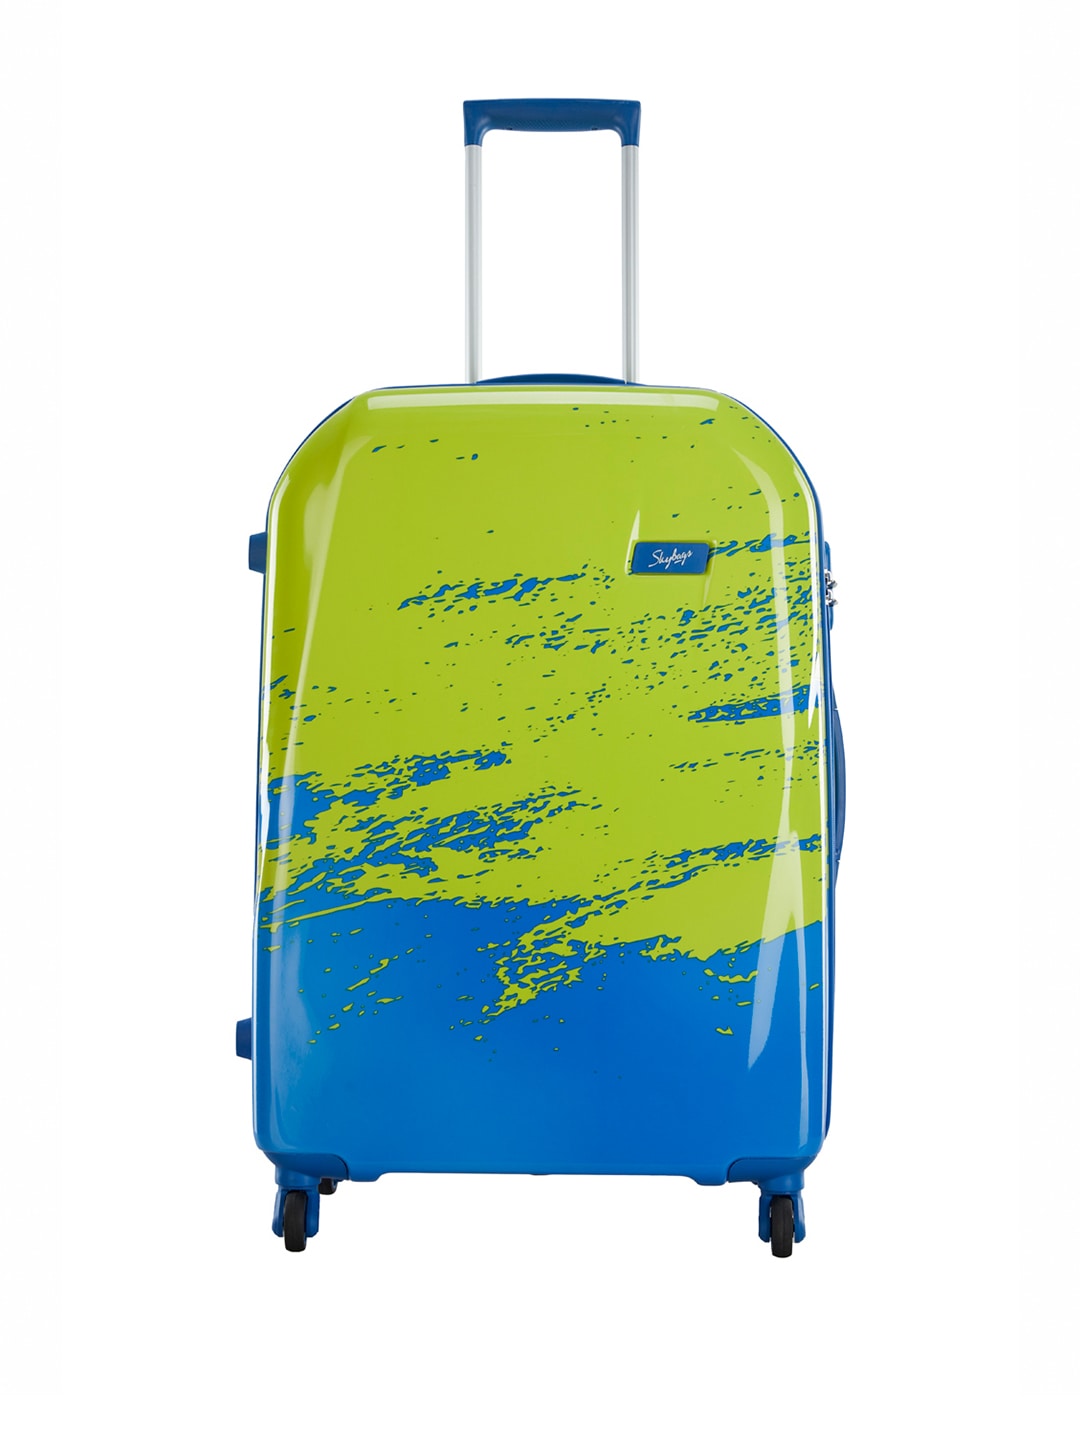 Skybags Green & Blue Horizon 75 360 Large Trolley Suitcase Price in India